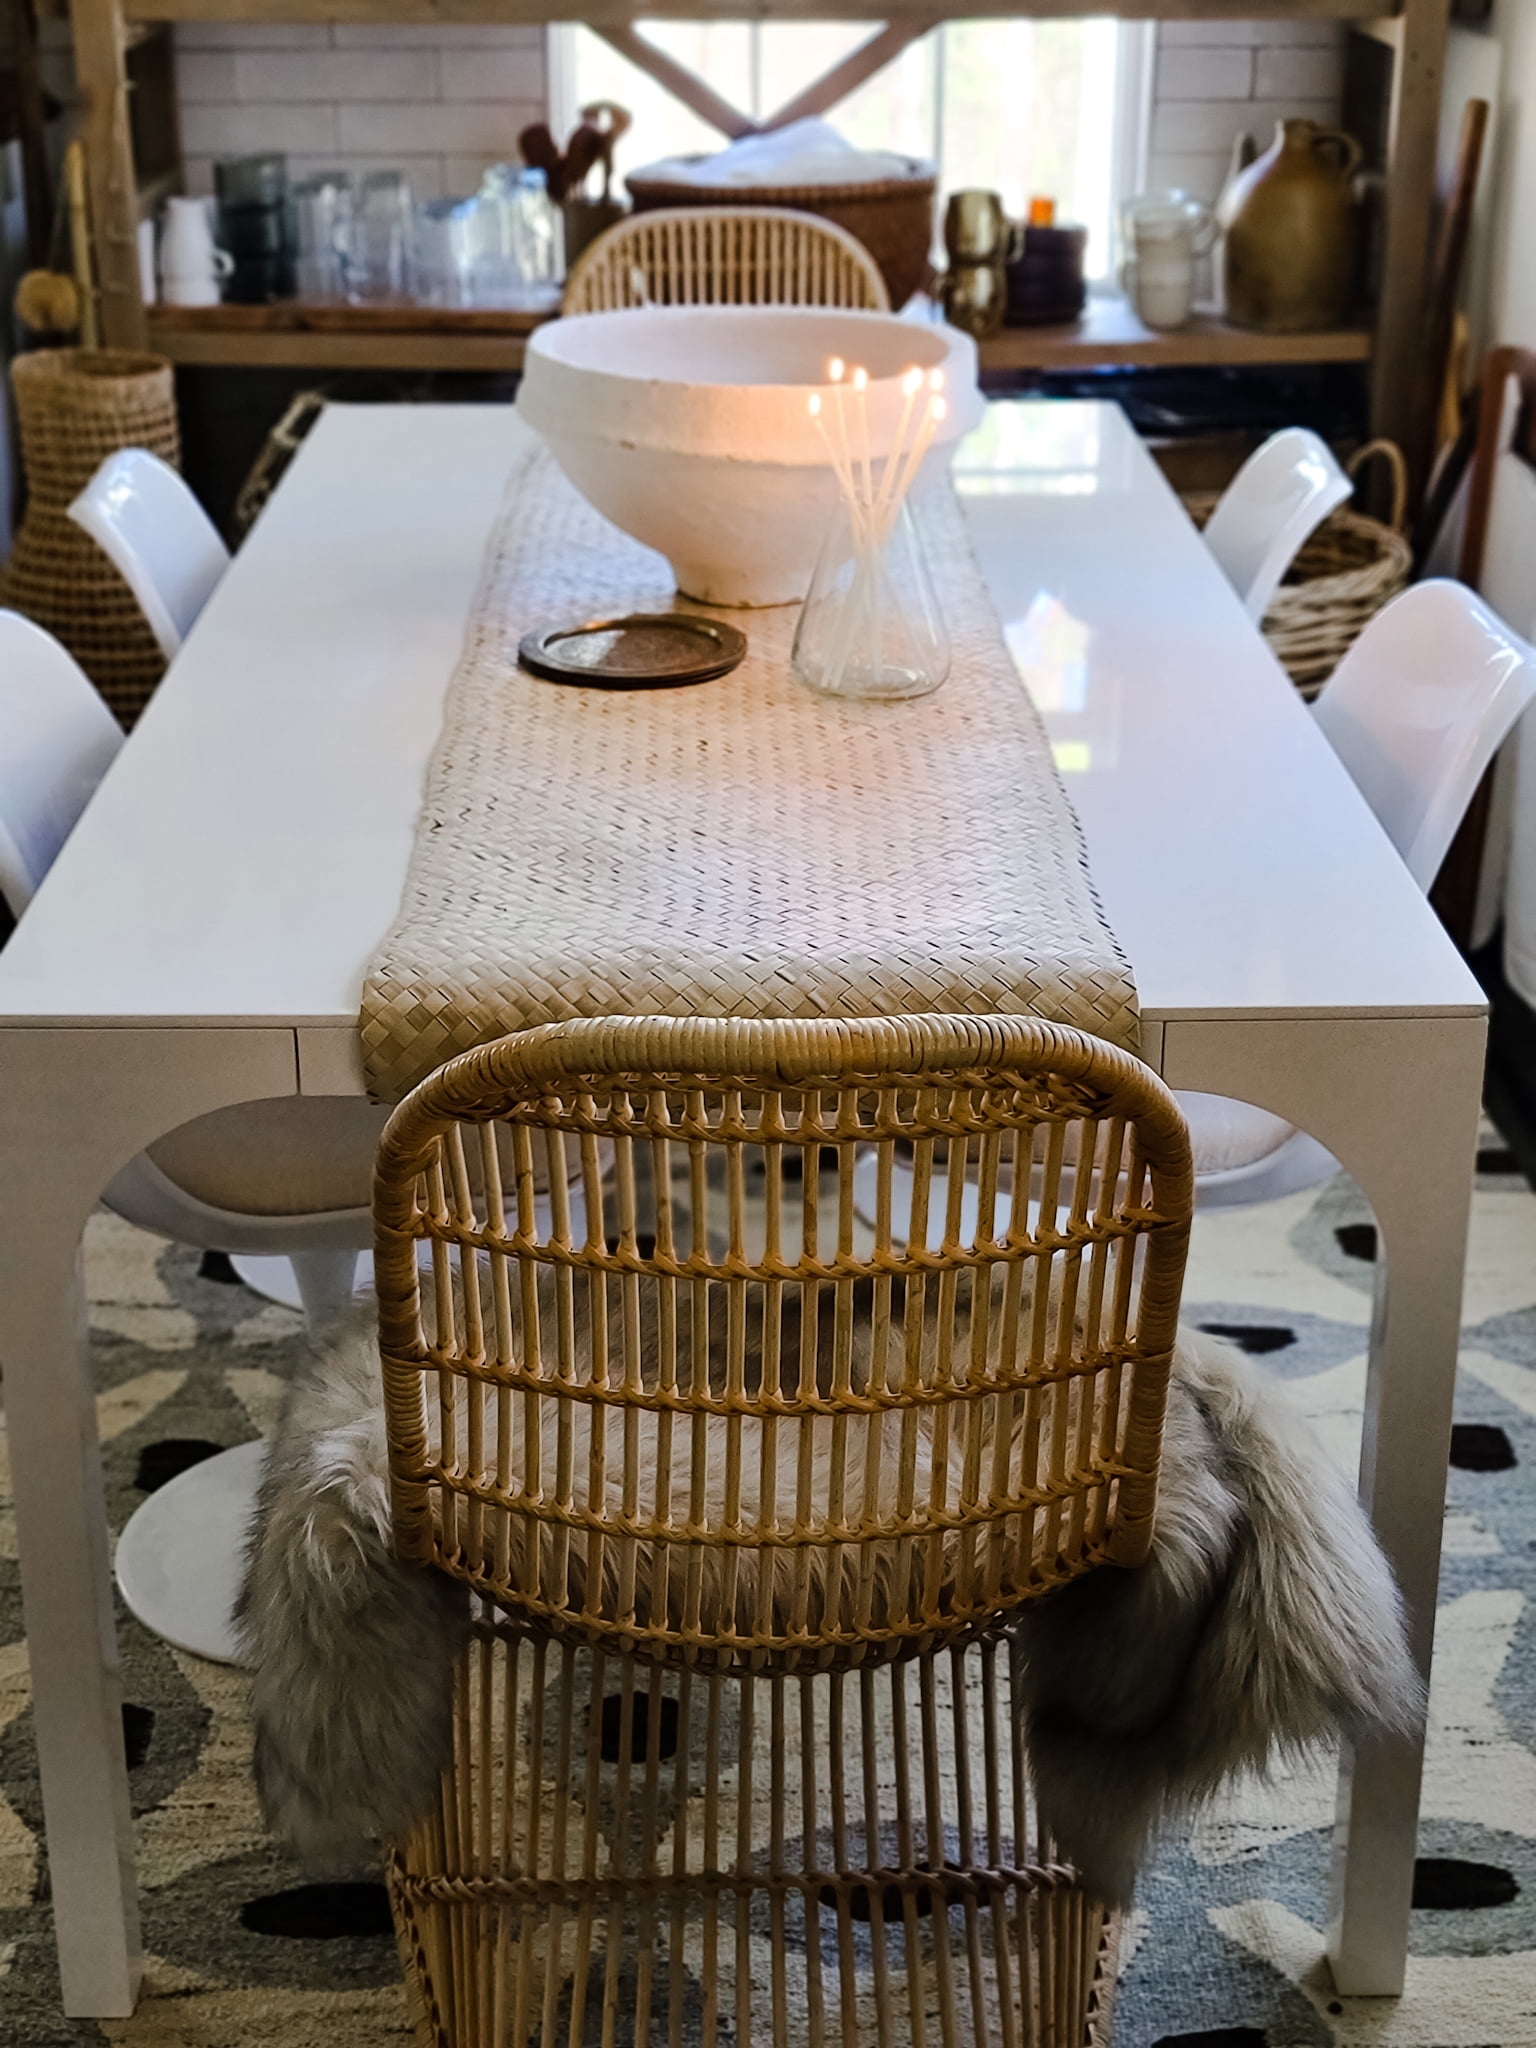 Scandinavian Modern Hygge style white dining room with candles texture woods and whites. Kitchen decor, vintage rugs, cane cabinet and open shelving.